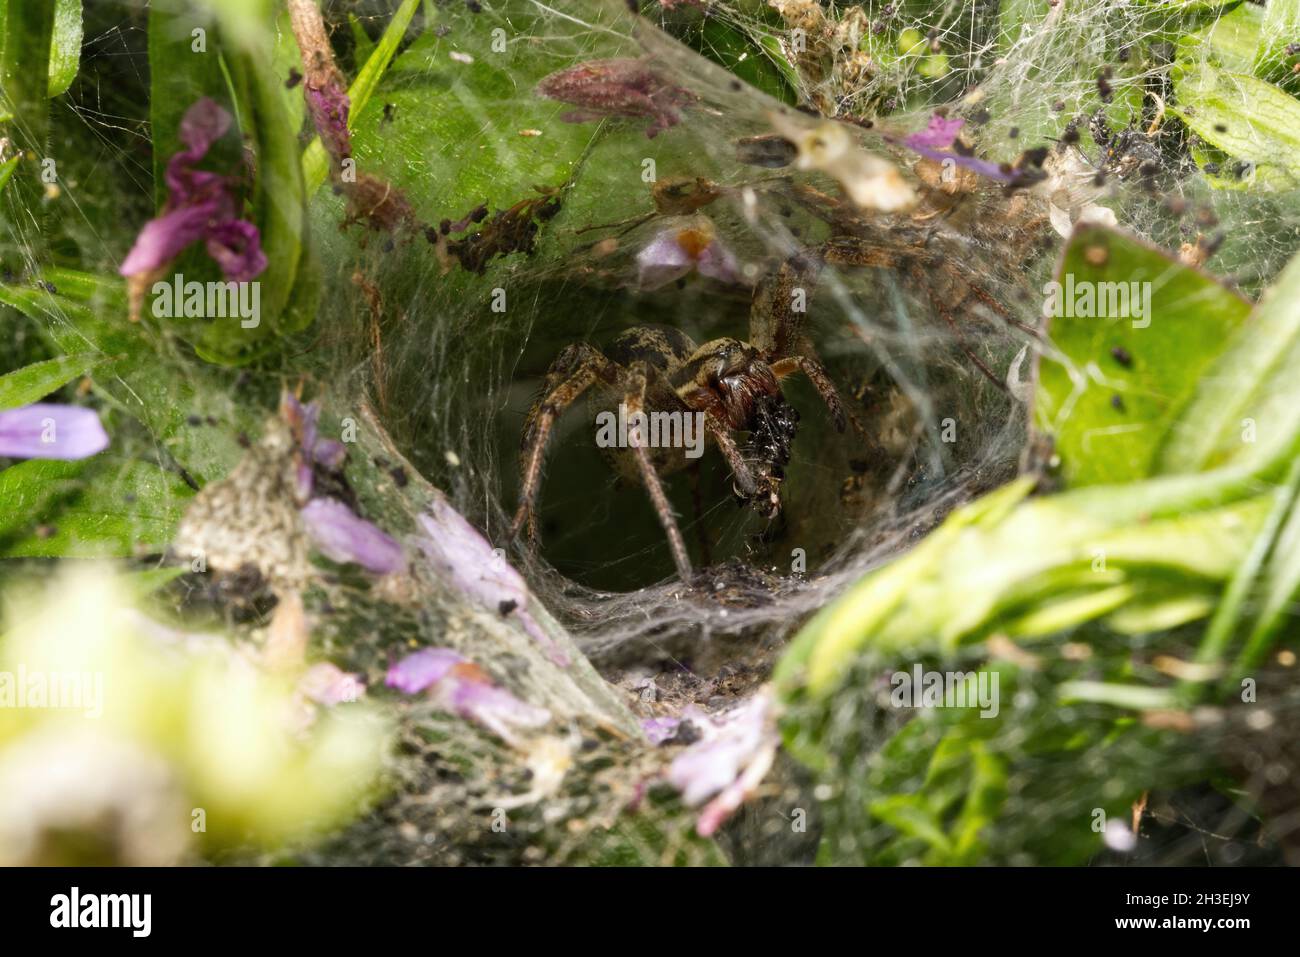 A labyrinth spider eating a prey item at the entrance to its funnel-shaped web, Essex, England Stock Photo